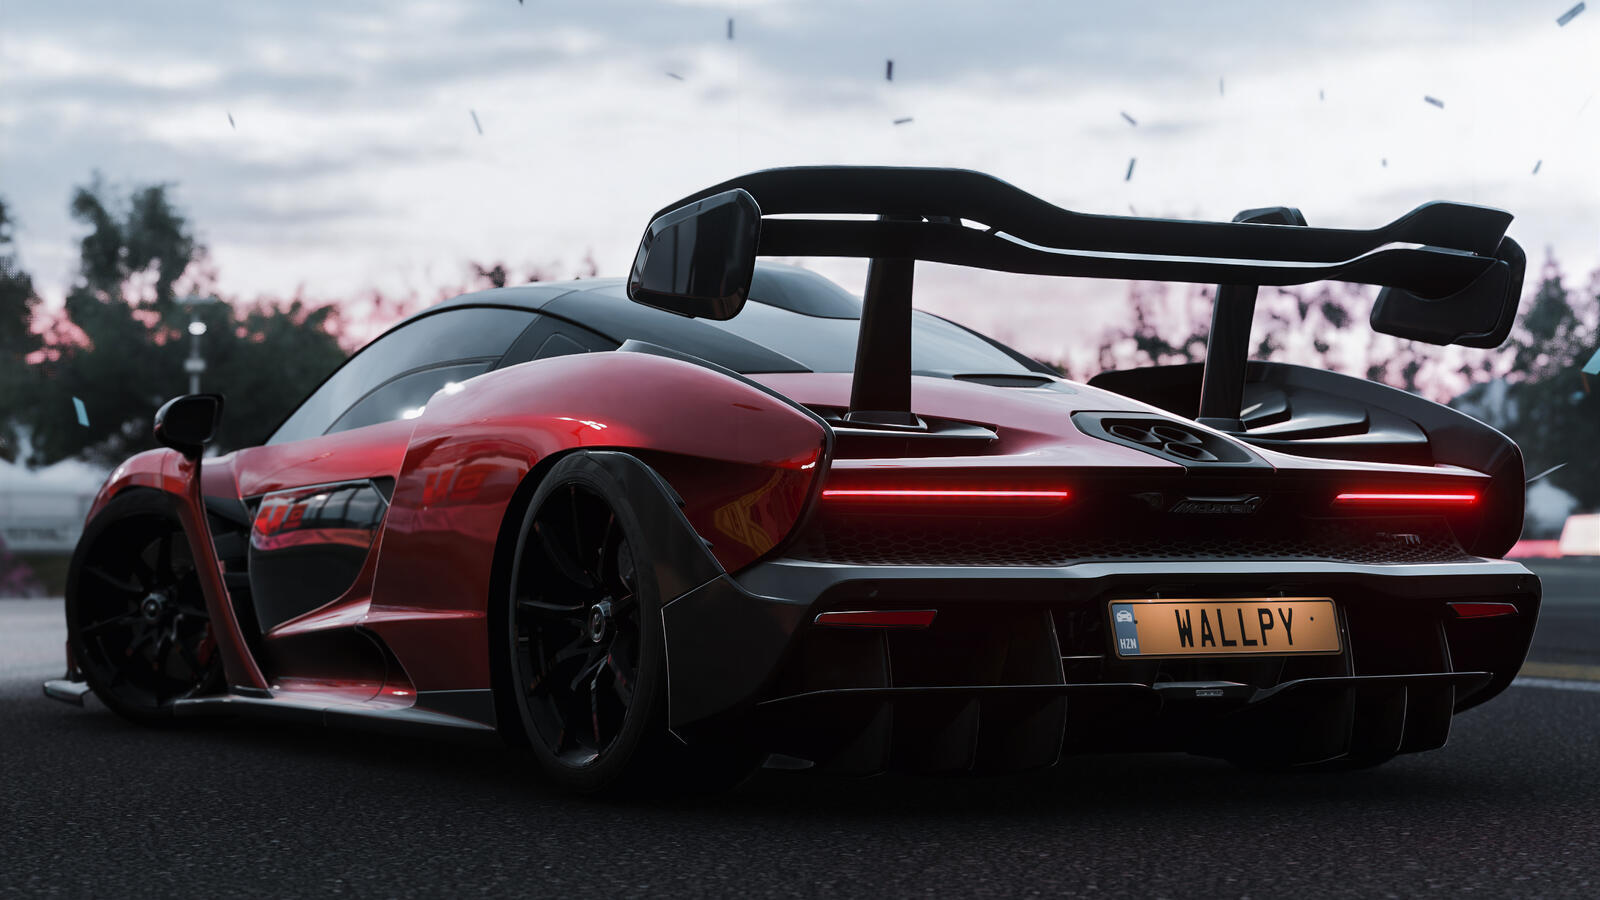 Wallpapers 2019 games Forza Horizon 4 red car on the desktop